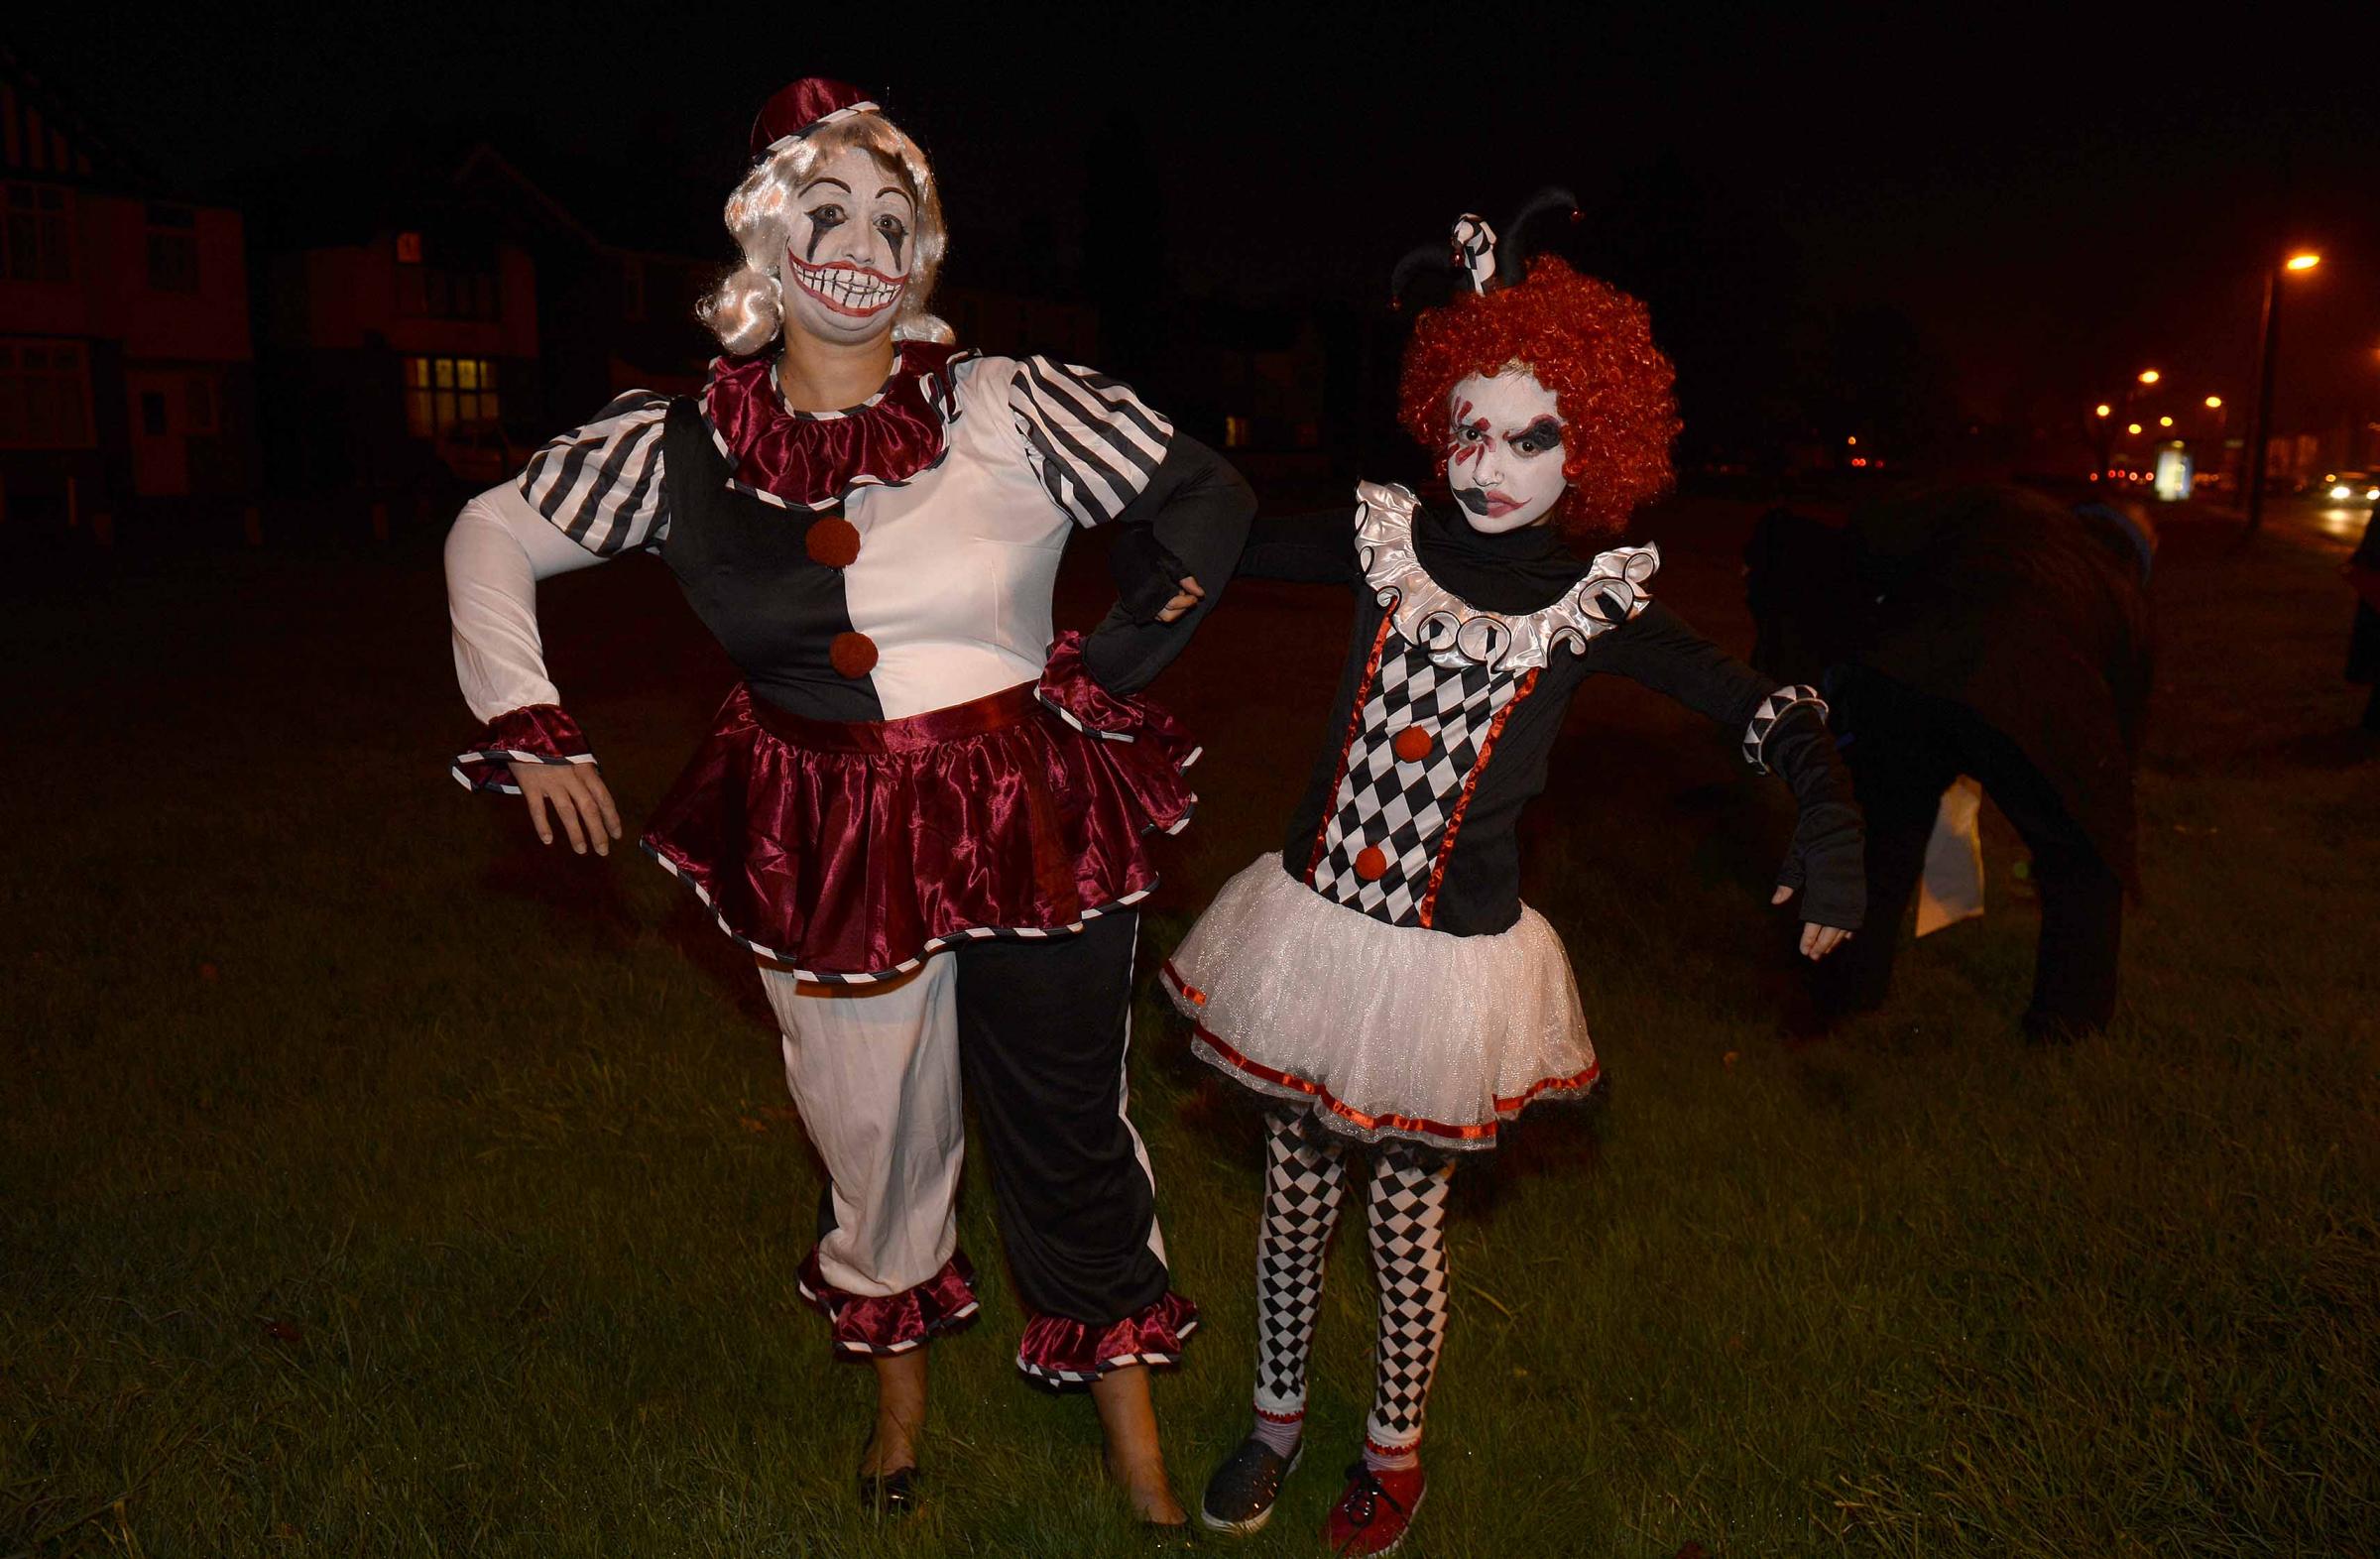 Clown costumes 'banned' from Guy Carnival following craze